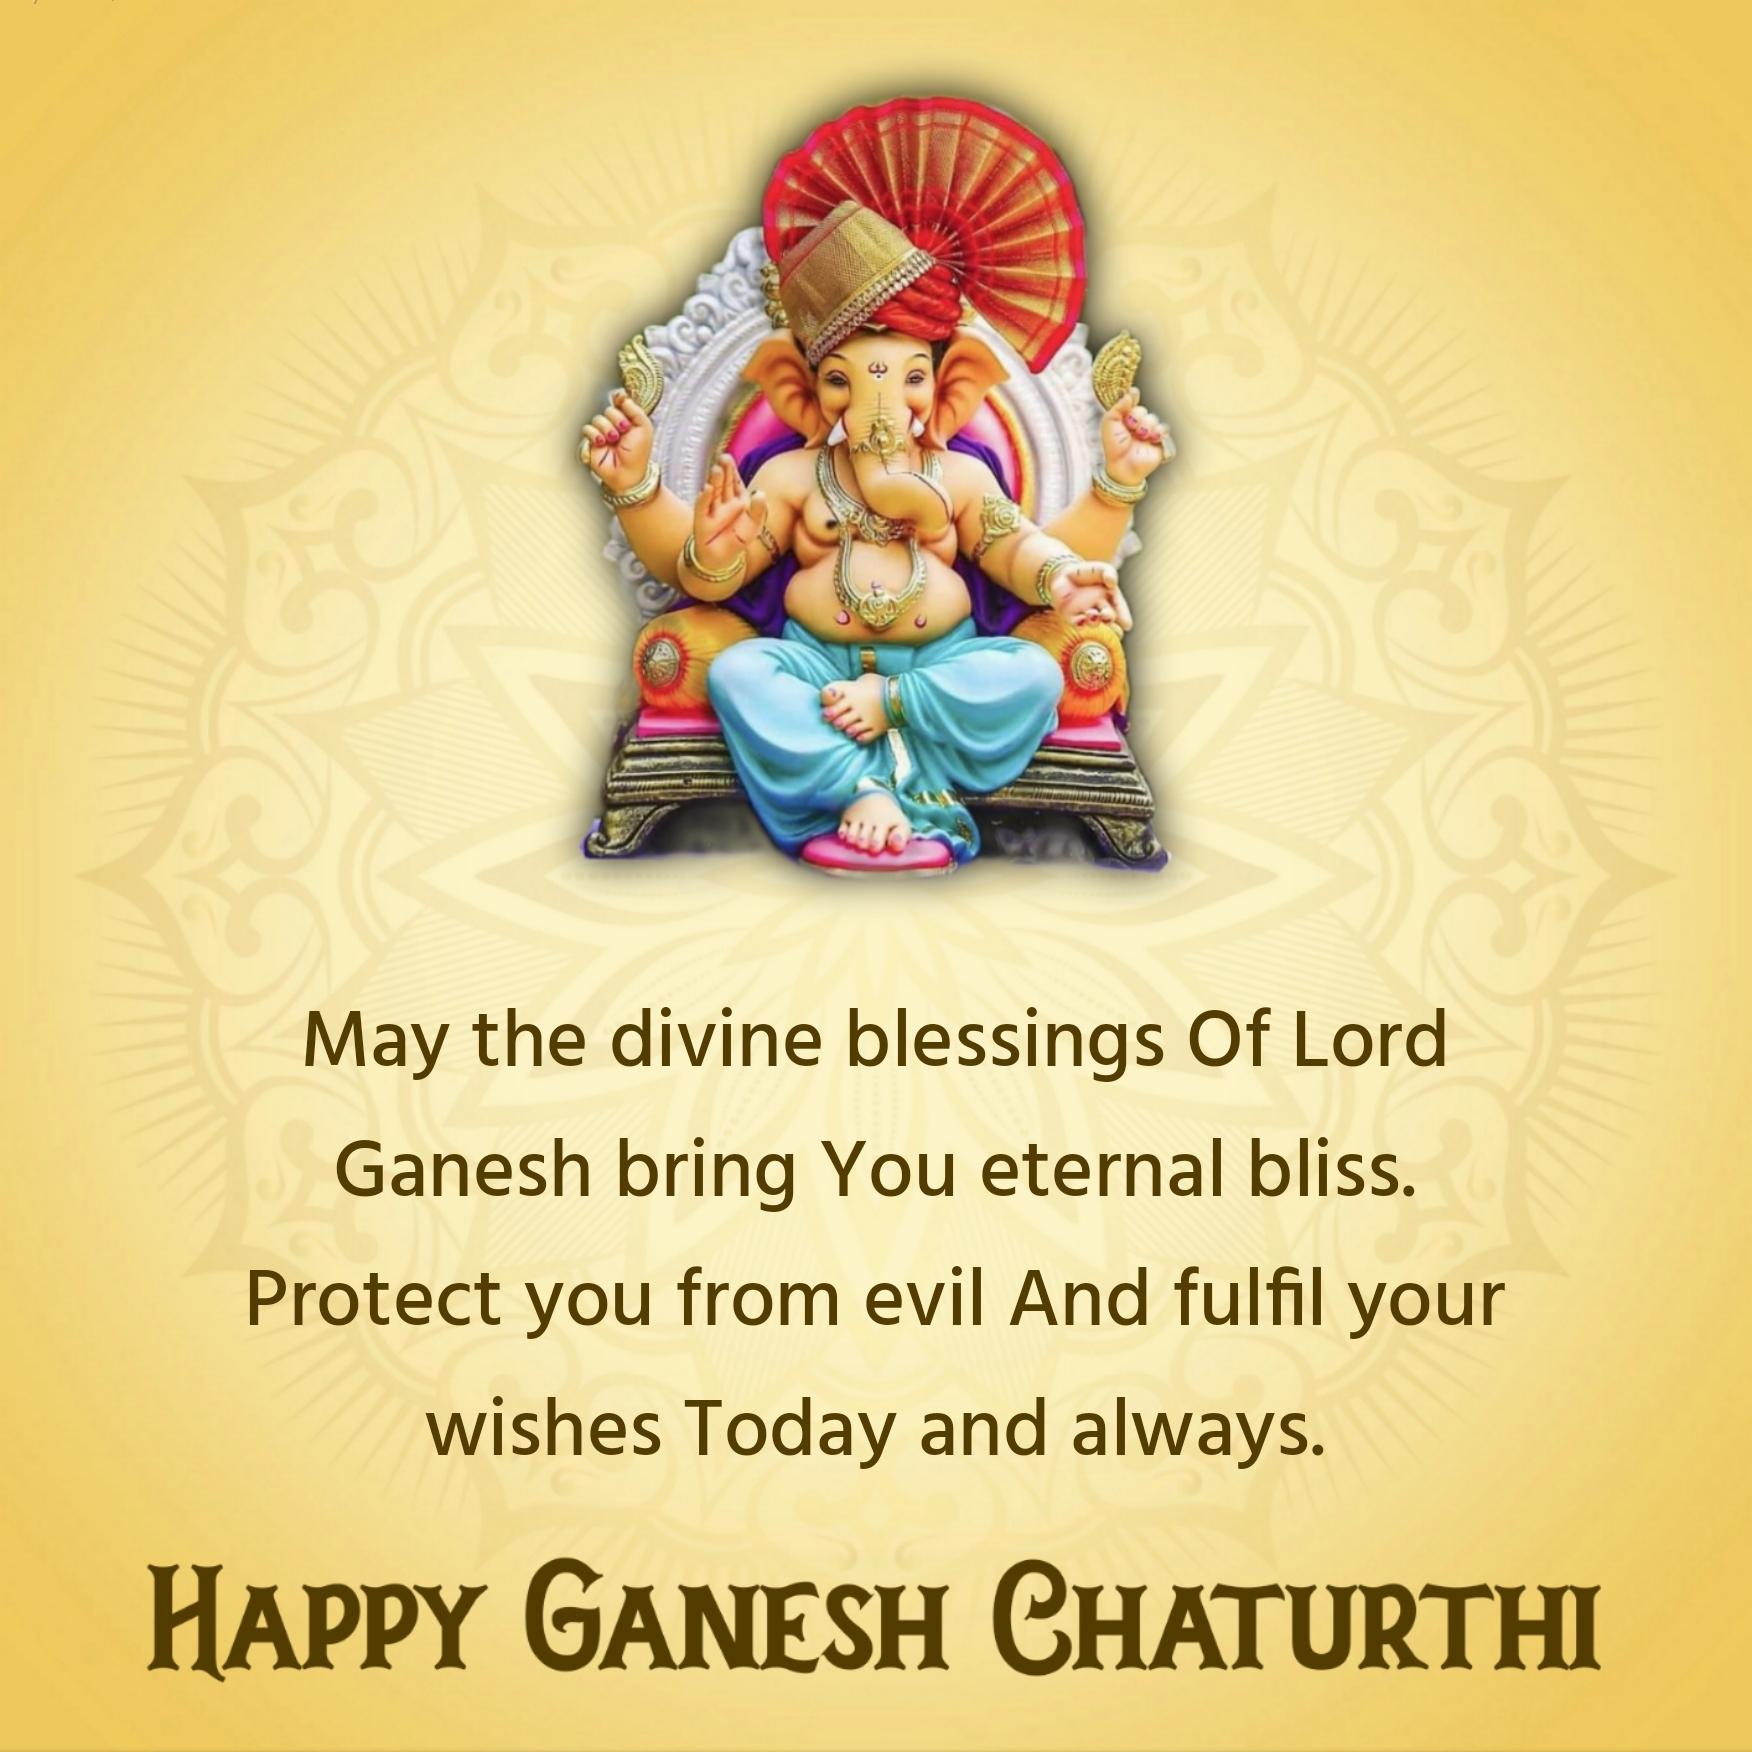 May the divine blessings Of Lord Ganesh bring You